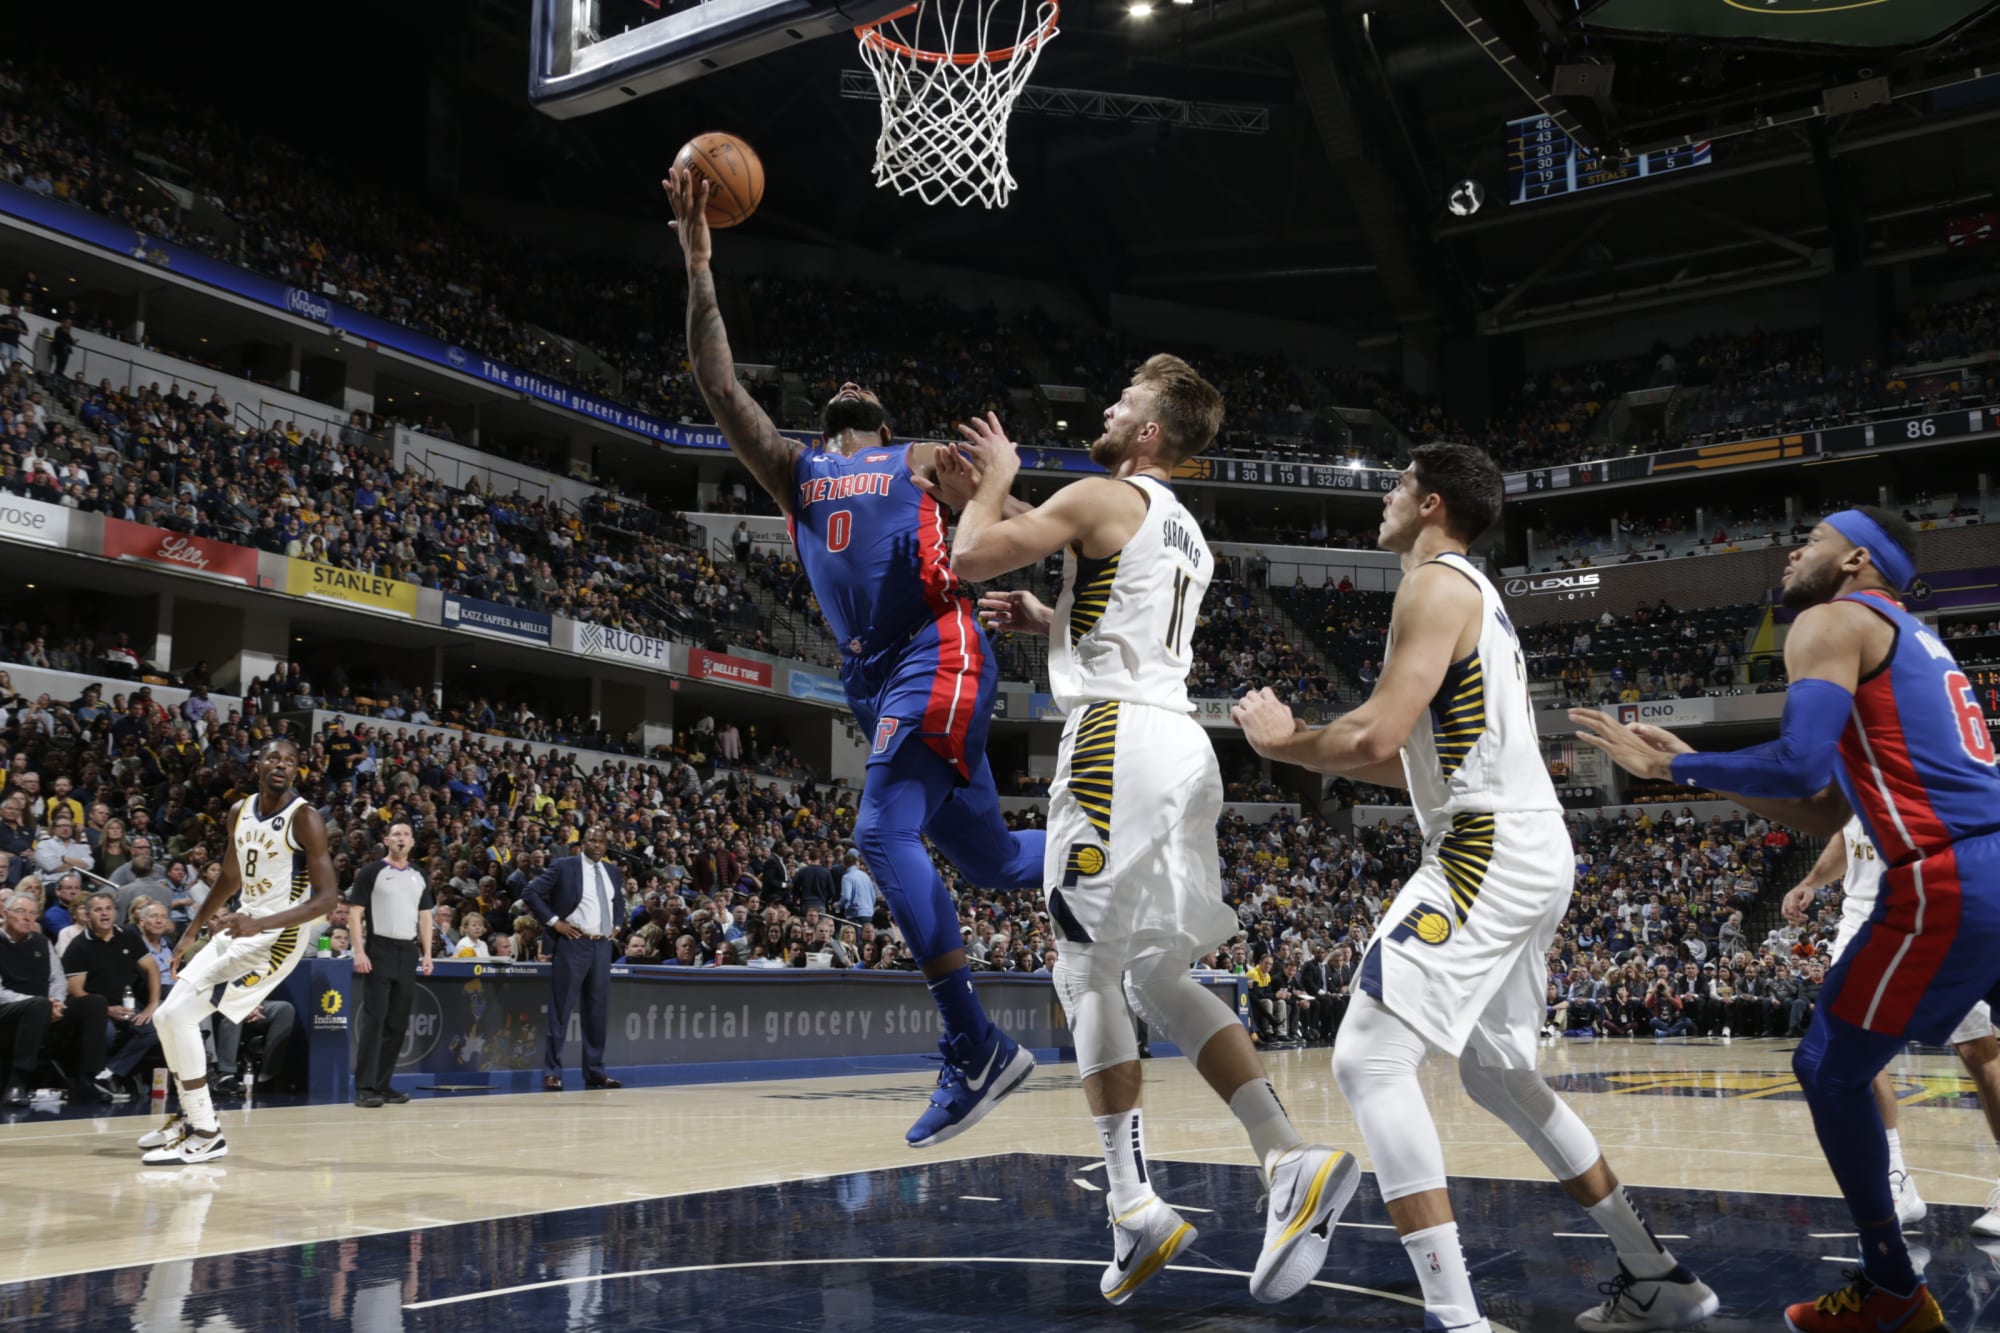 Indiana Pacers vs. Detroit Pistons game thread, preview and DFS tips